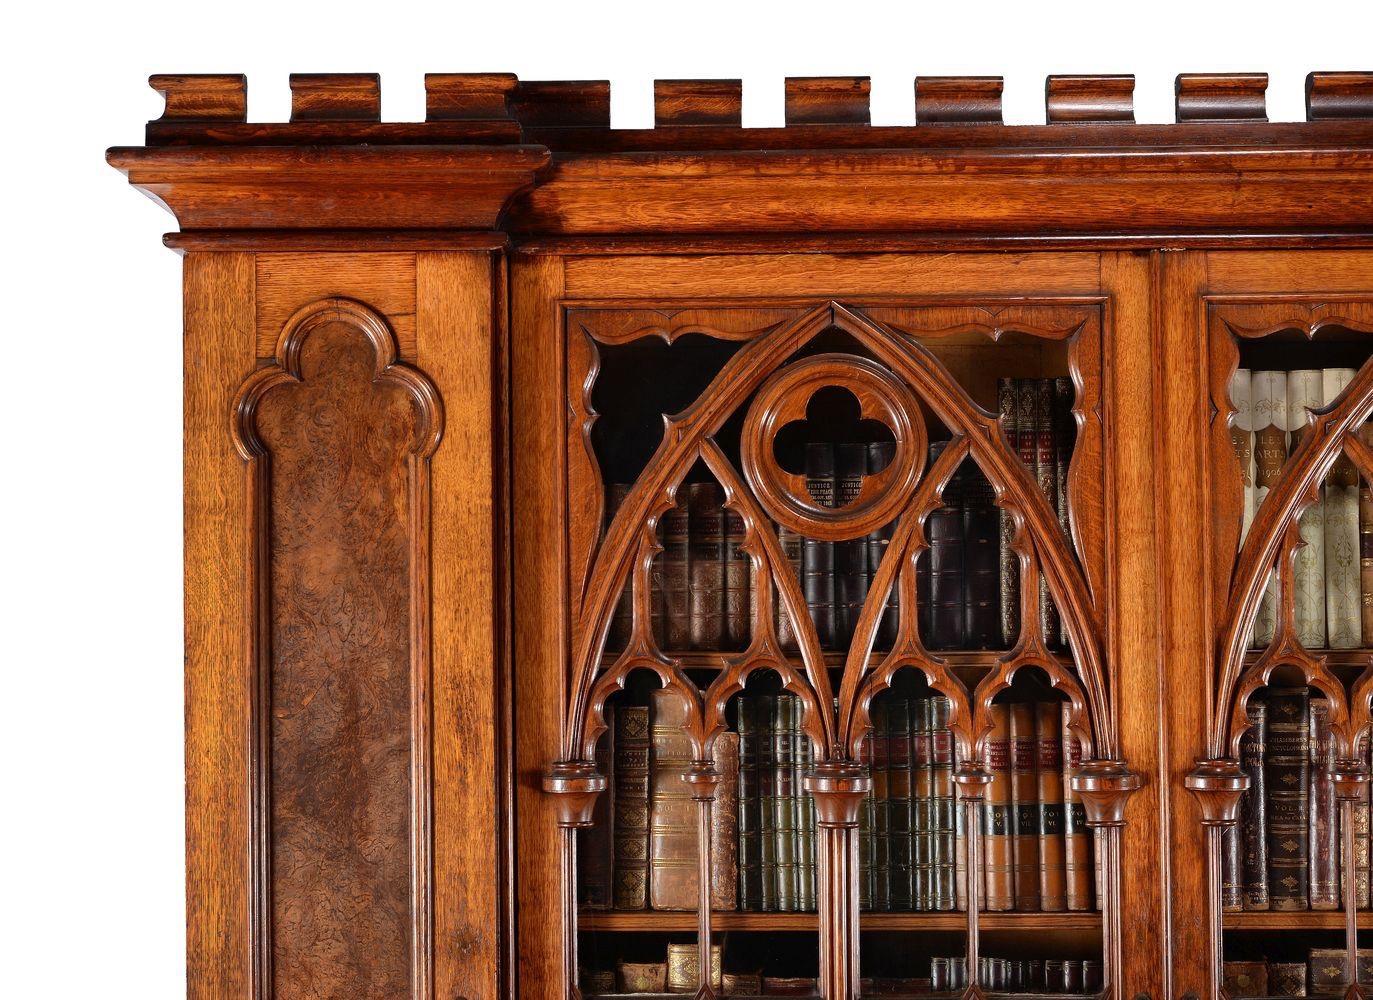 A stunning and magnificent example of a Gothic Revival oak and pollard oak cabinet bookcase, circa 1880, this is an amazing piece and would grace any of the countries cathedrals or stately homes.
This beautiful bookcase is of inverted breakfront